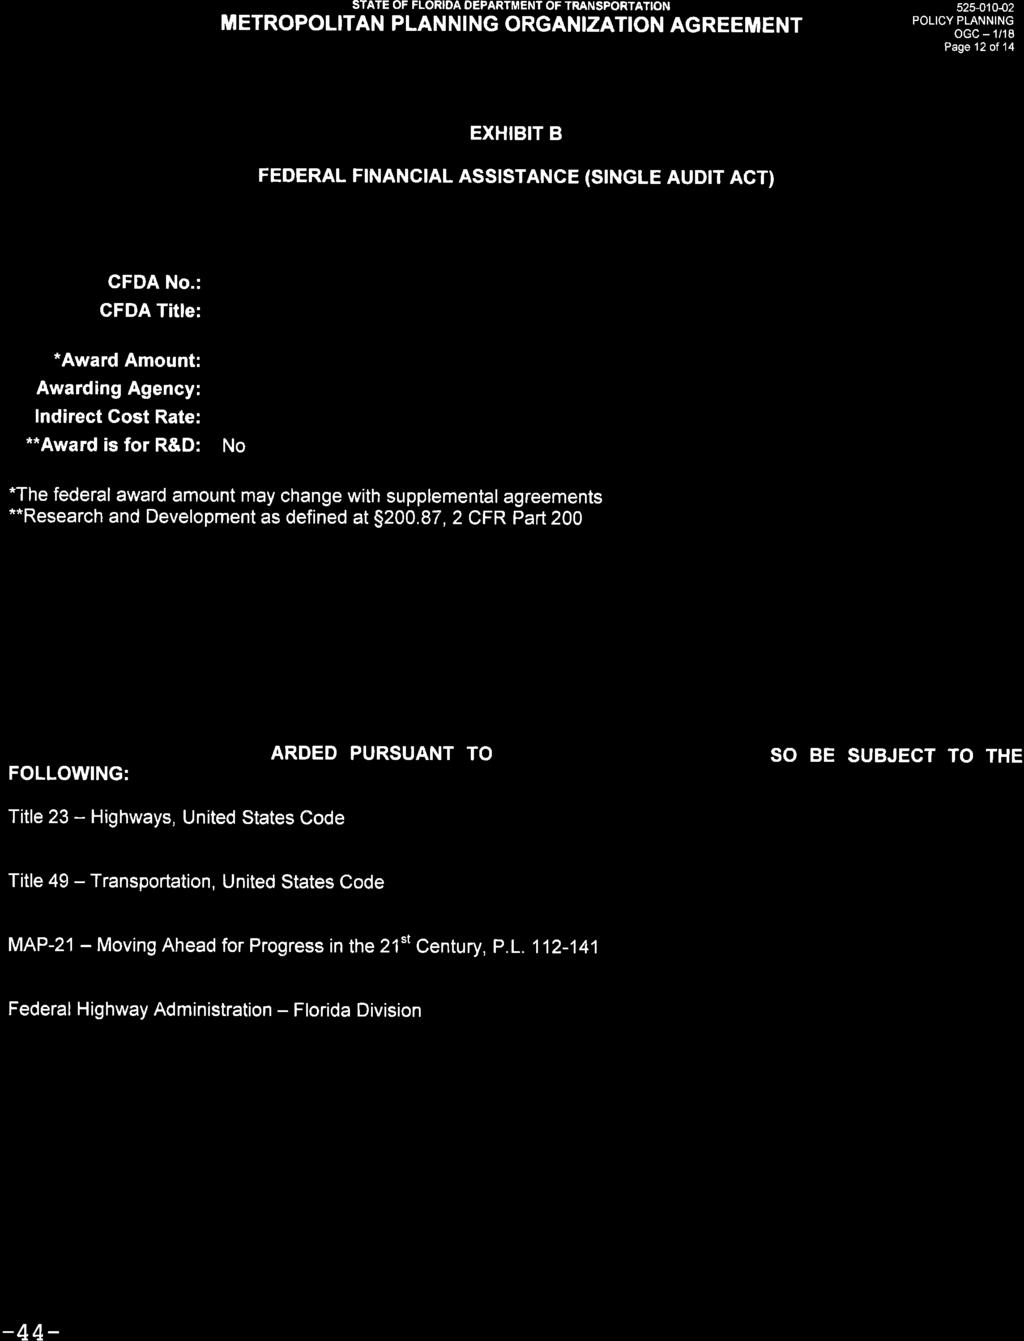 STATE OF FLORIDA DEPARTMENT OF TRANSPORTATION METROPOLITAN PLANNING ORGANIZATION AGREEMENT 525-010-02 POLICY PLANNING OGC-1/18 Page 12of14 EXHIBIT B FEDERAL FINANCIAL ASSISTANCE (SINGLE AUDIT ACT)